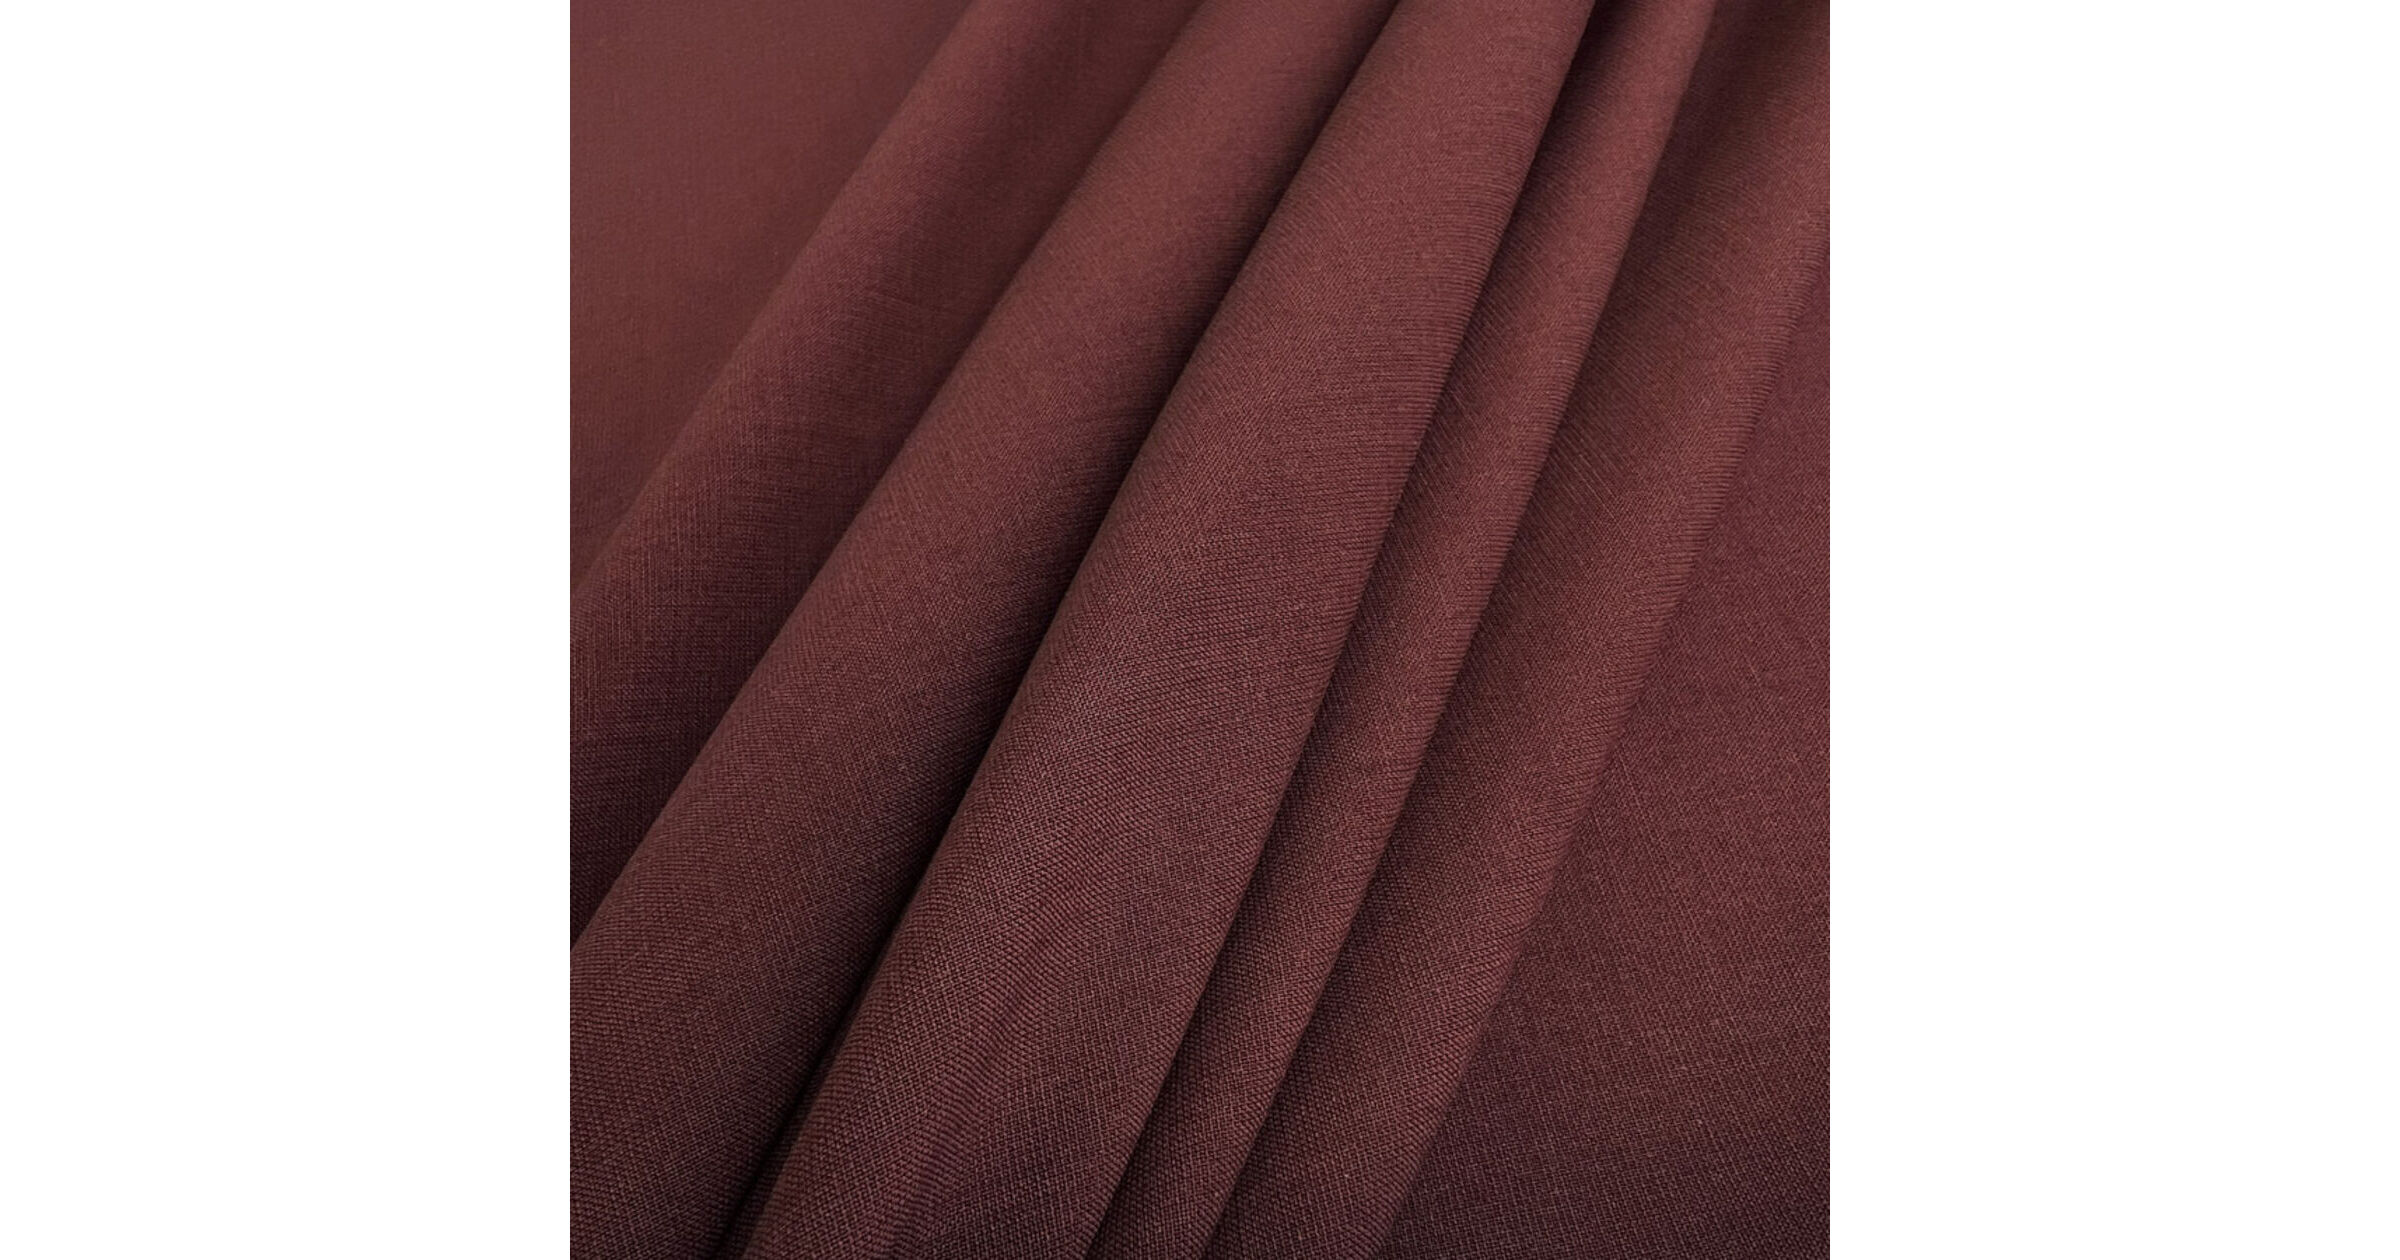 Wool Fabric, Café Au Lait Stretch Virgin Wool Crepe Suiting (Made in Italy)  – Britex Fabrics